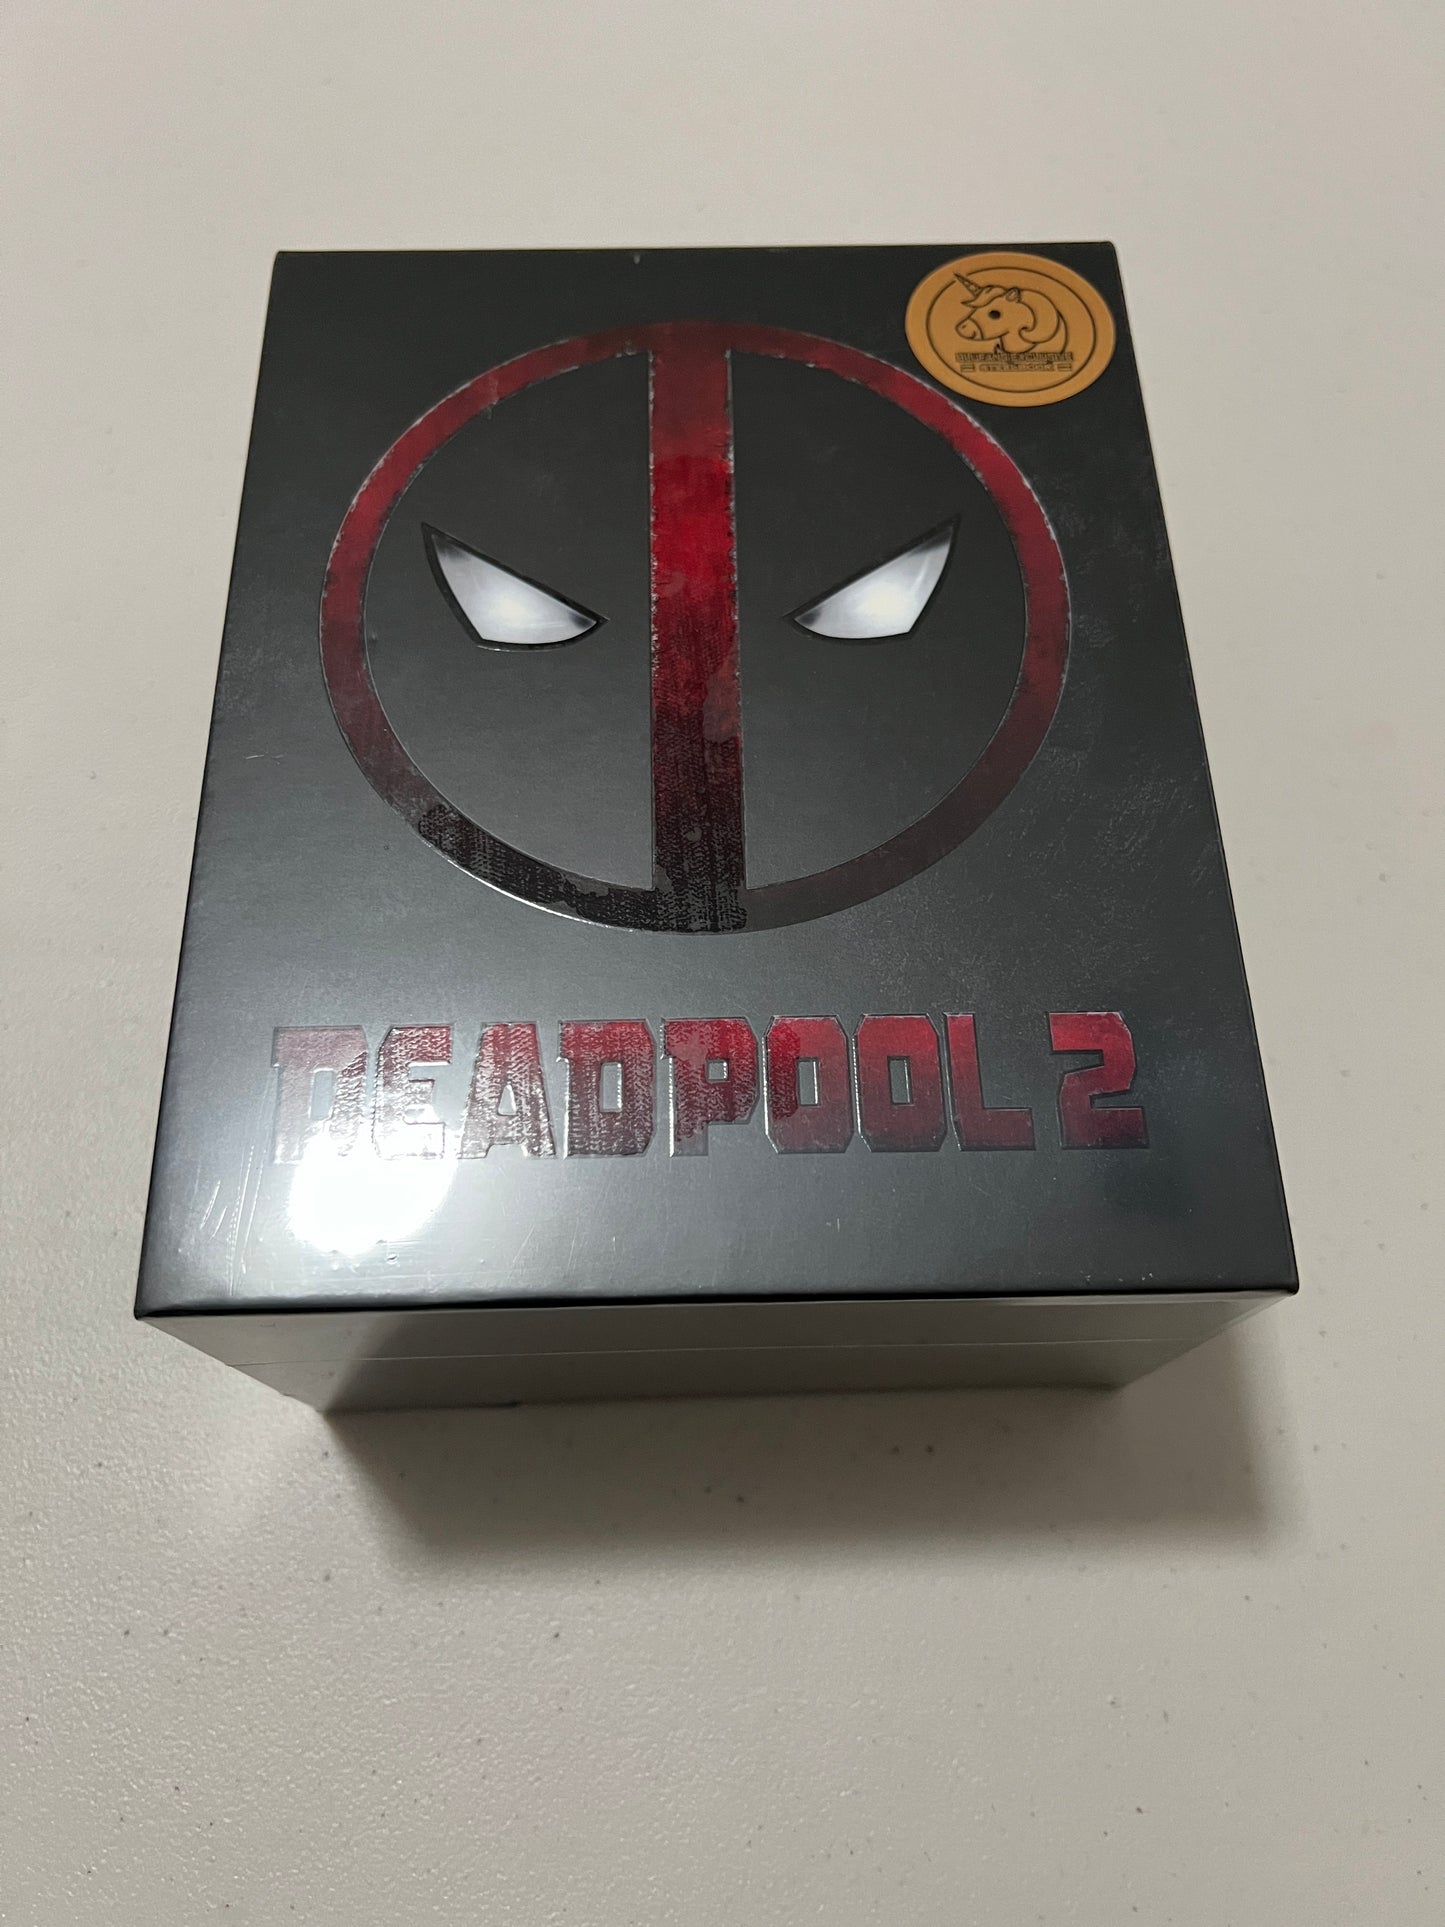 Deadpool 2: Once Upon a Deadpool (4K UHD+2D Blu-ray SteelBook) (Blufans Exclusive #54) ONE CLICK BOX SET